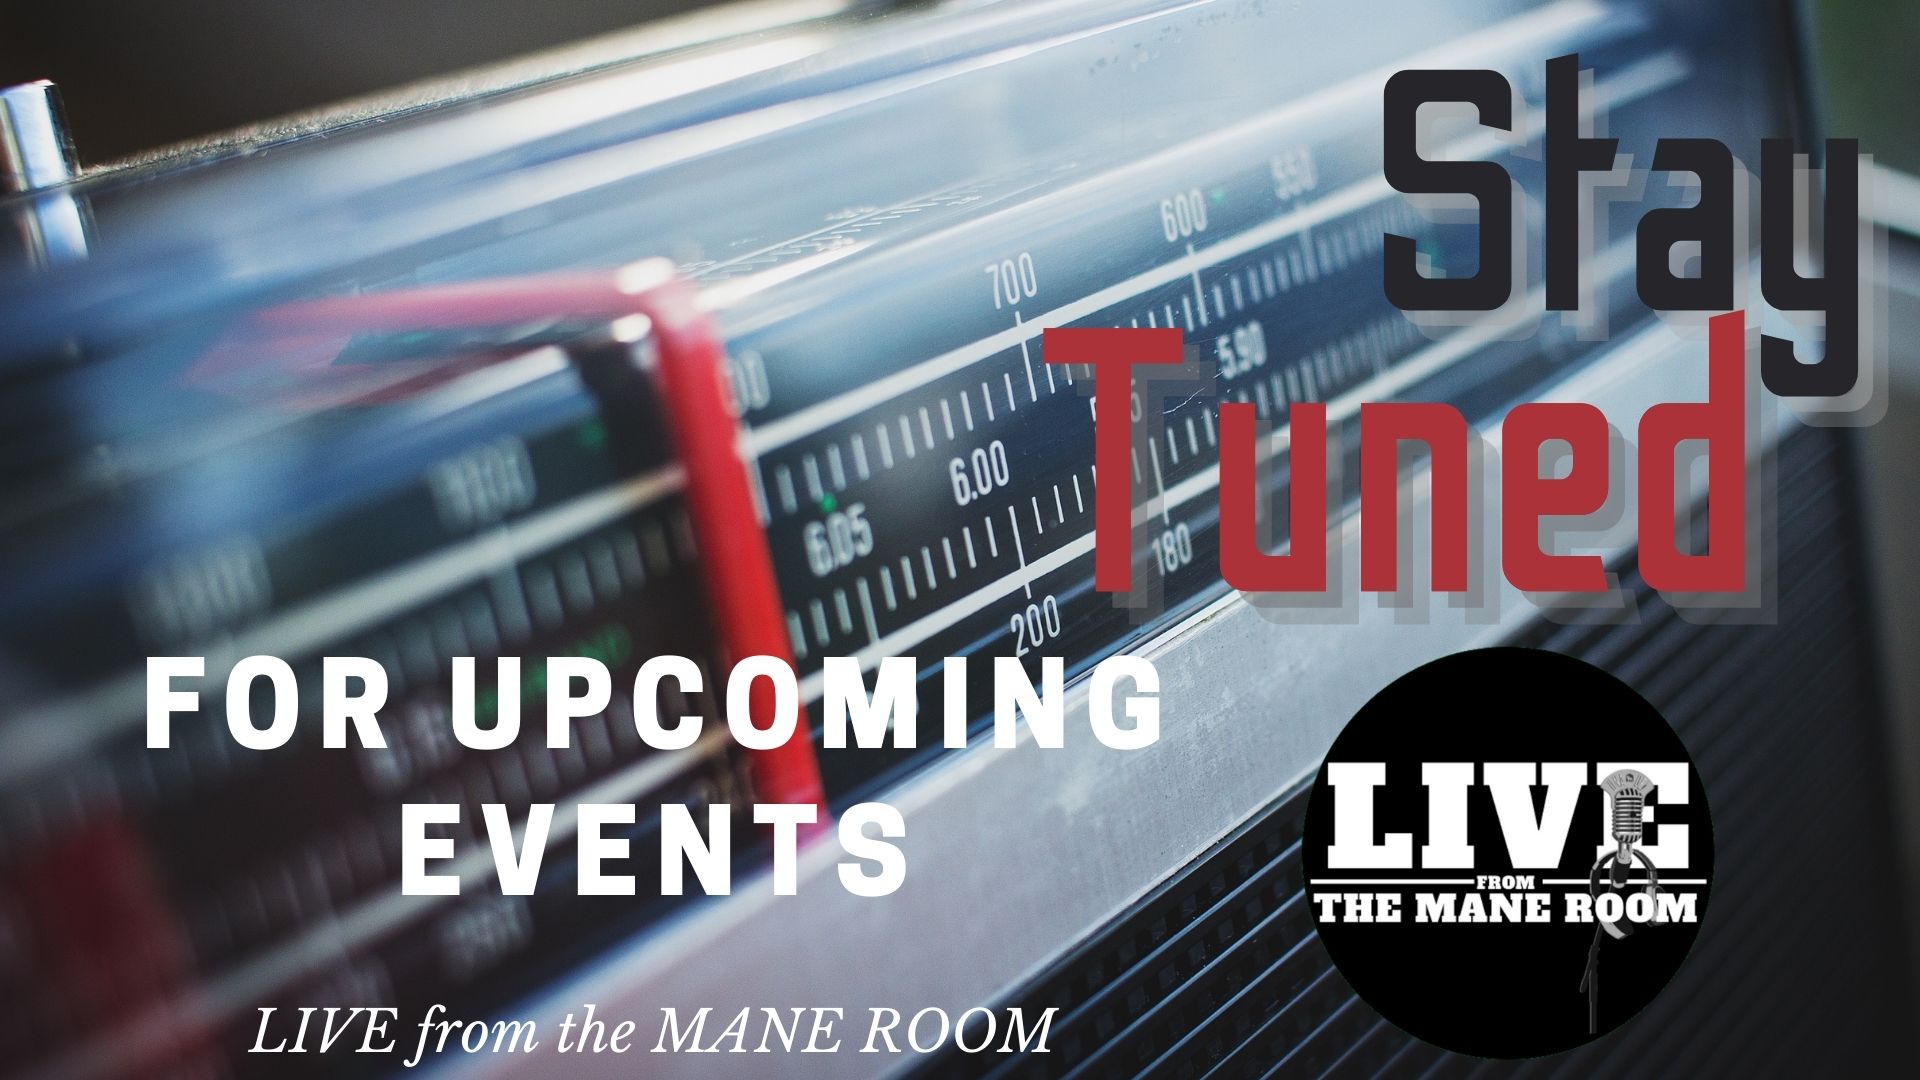 Stay Tuned for more events - Live From the Mane Room